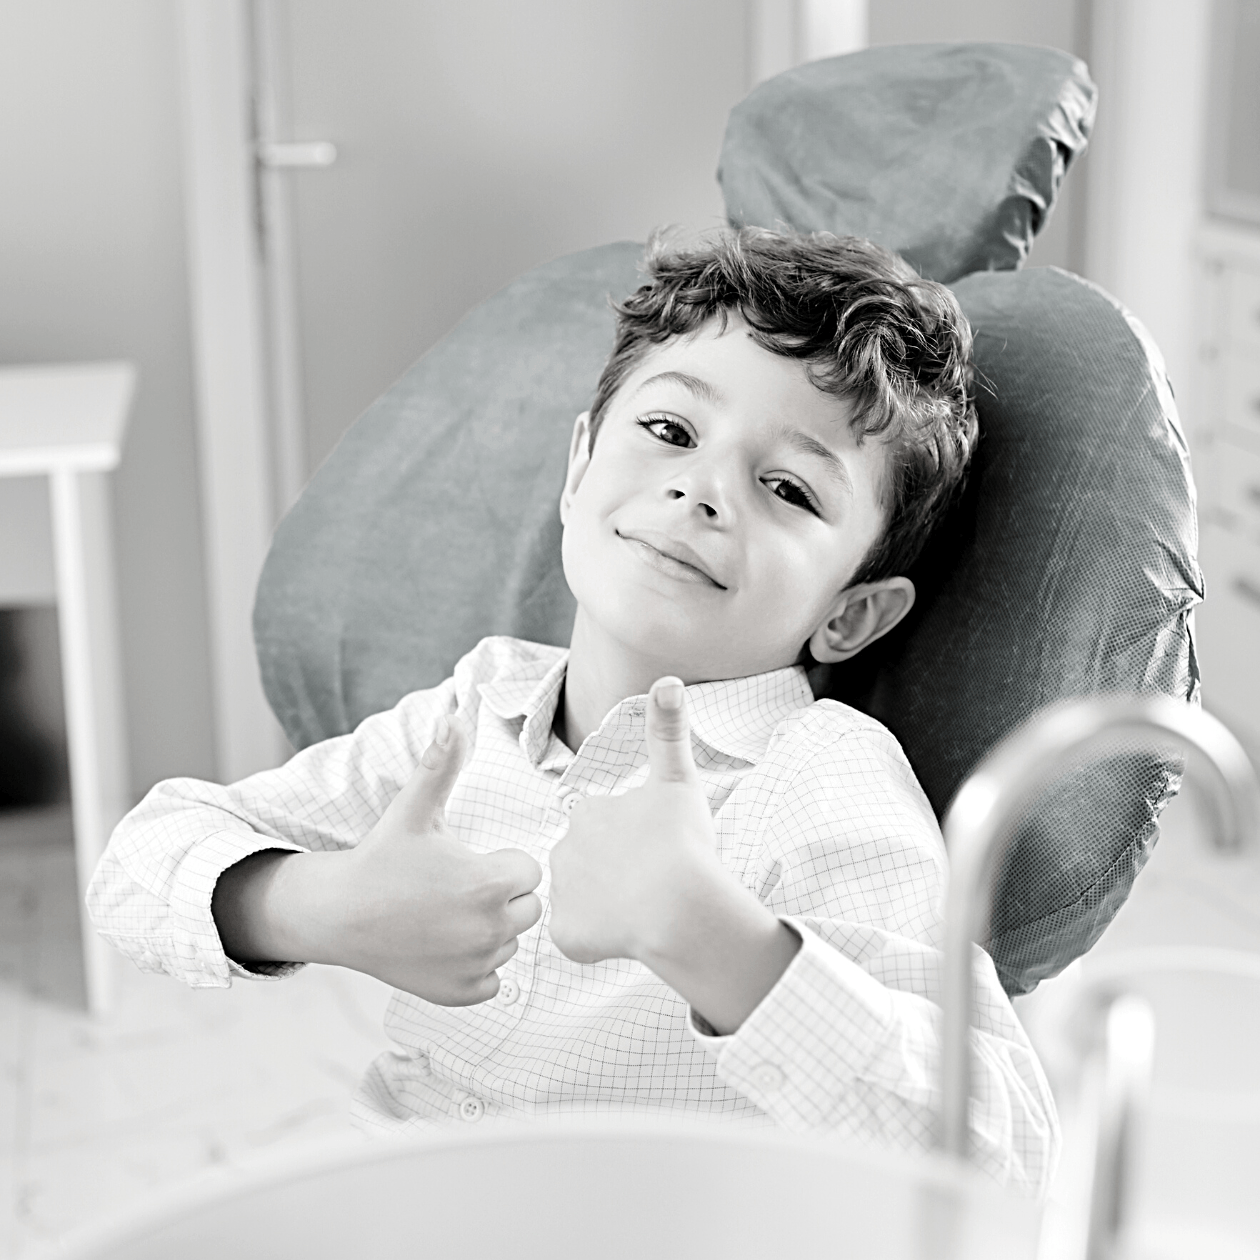 FLOURIDE TREATMENT | Boy with thumbs up at dentist | Pediatric Dentist in Charlotte NC 28028